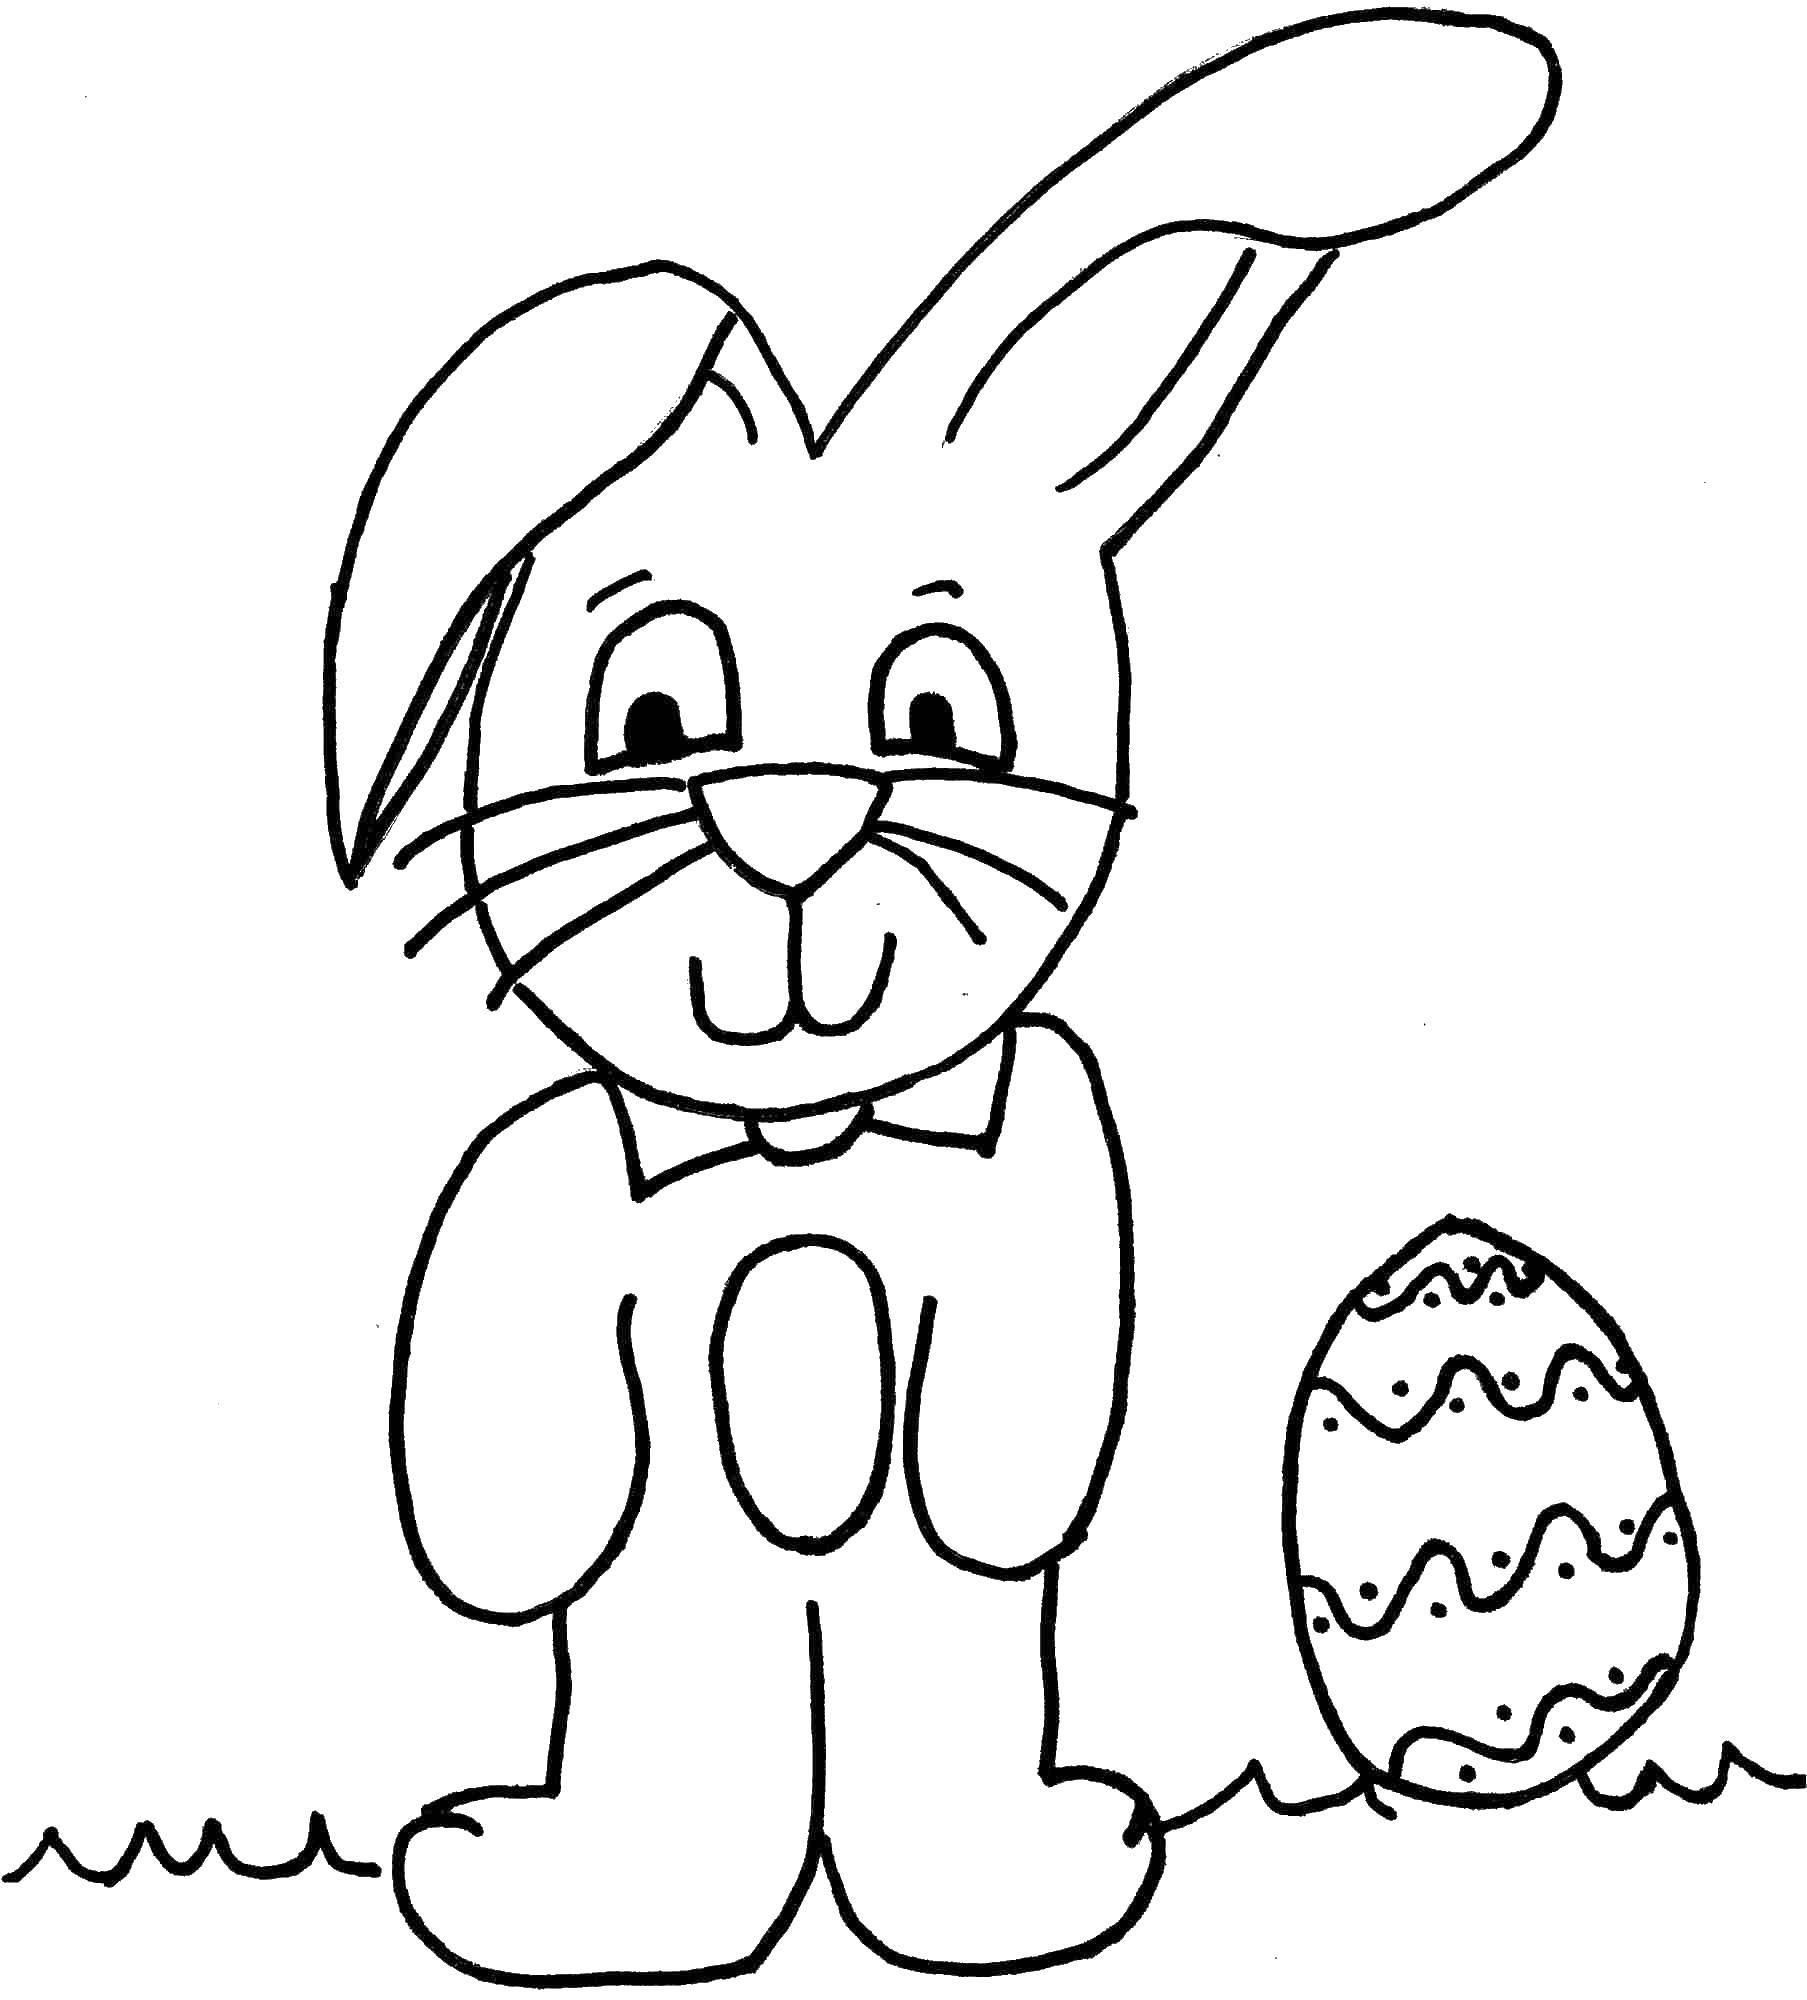 Coloring The Easter Bunny. Category Animals. Tags:  animals, rabbit, Easter.